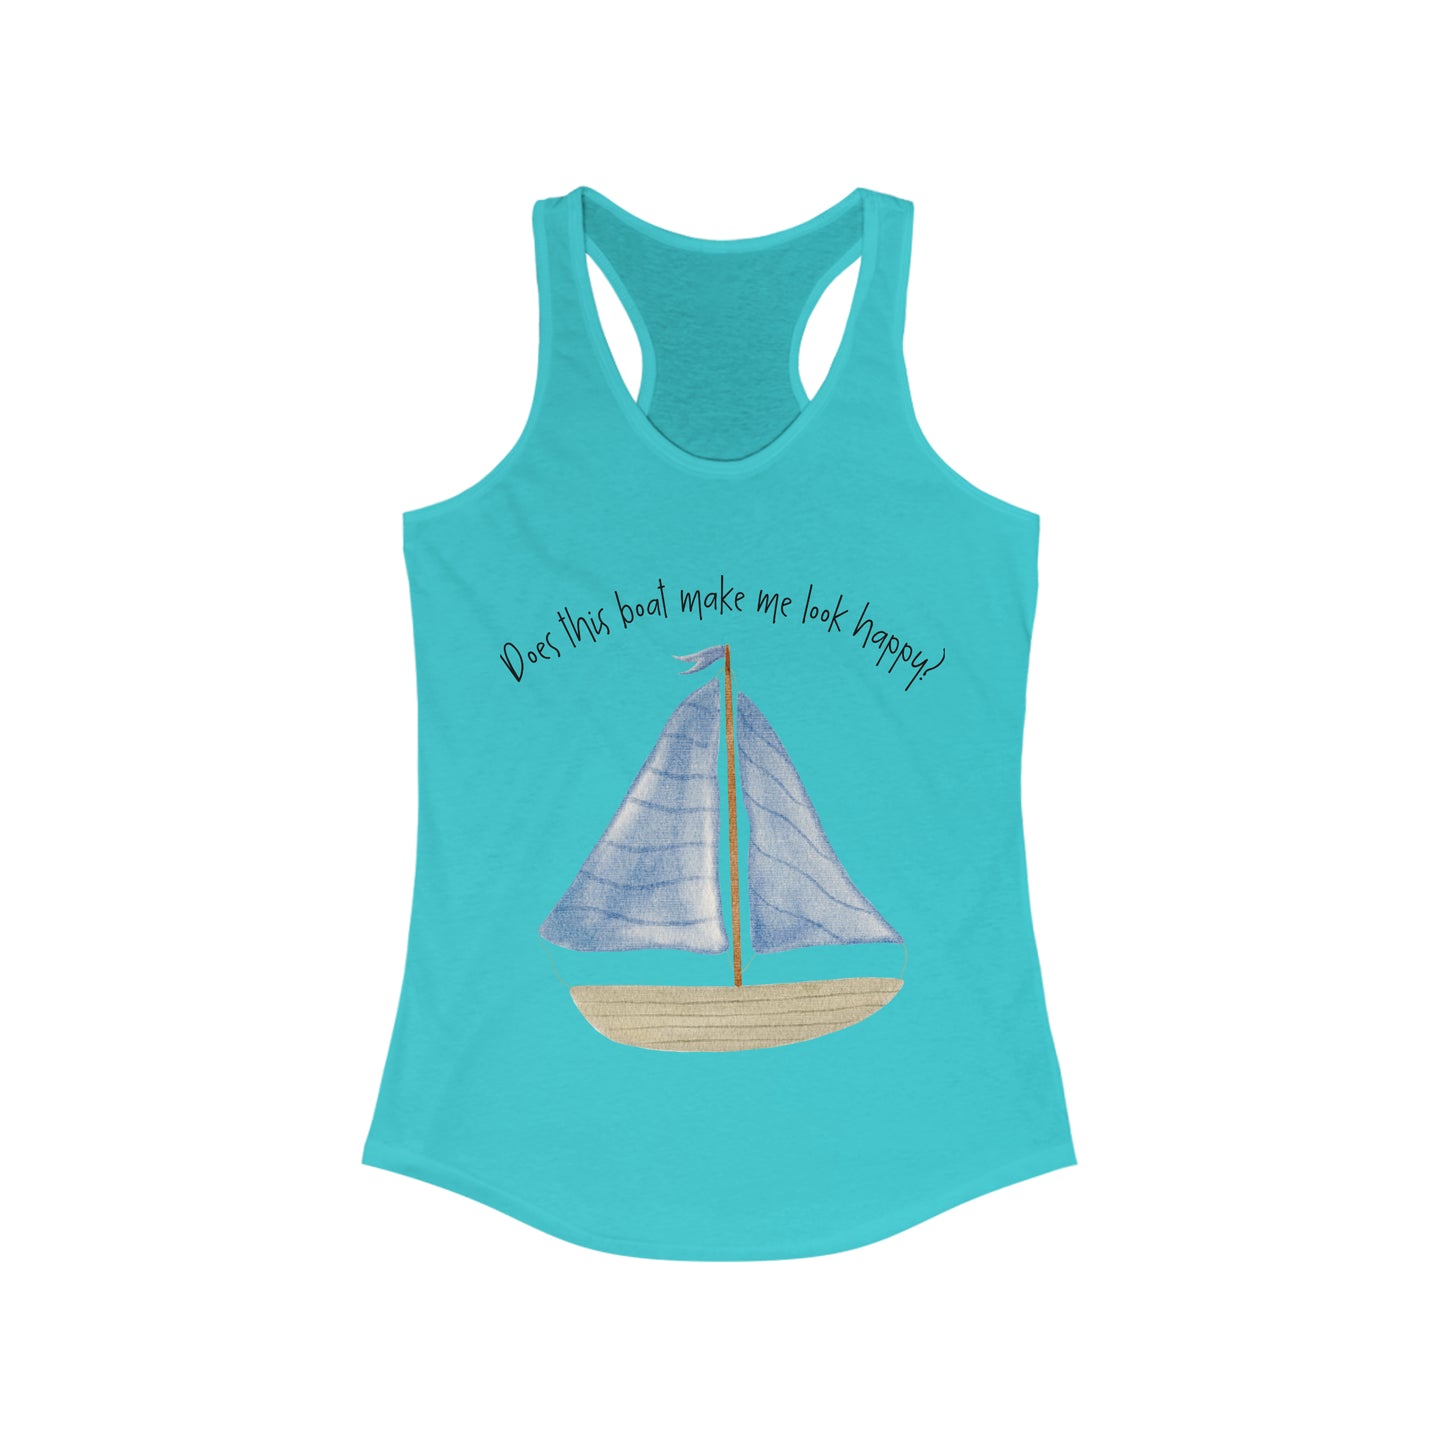 Does this boat make me look happy? Women's Ideal Racerback Tank